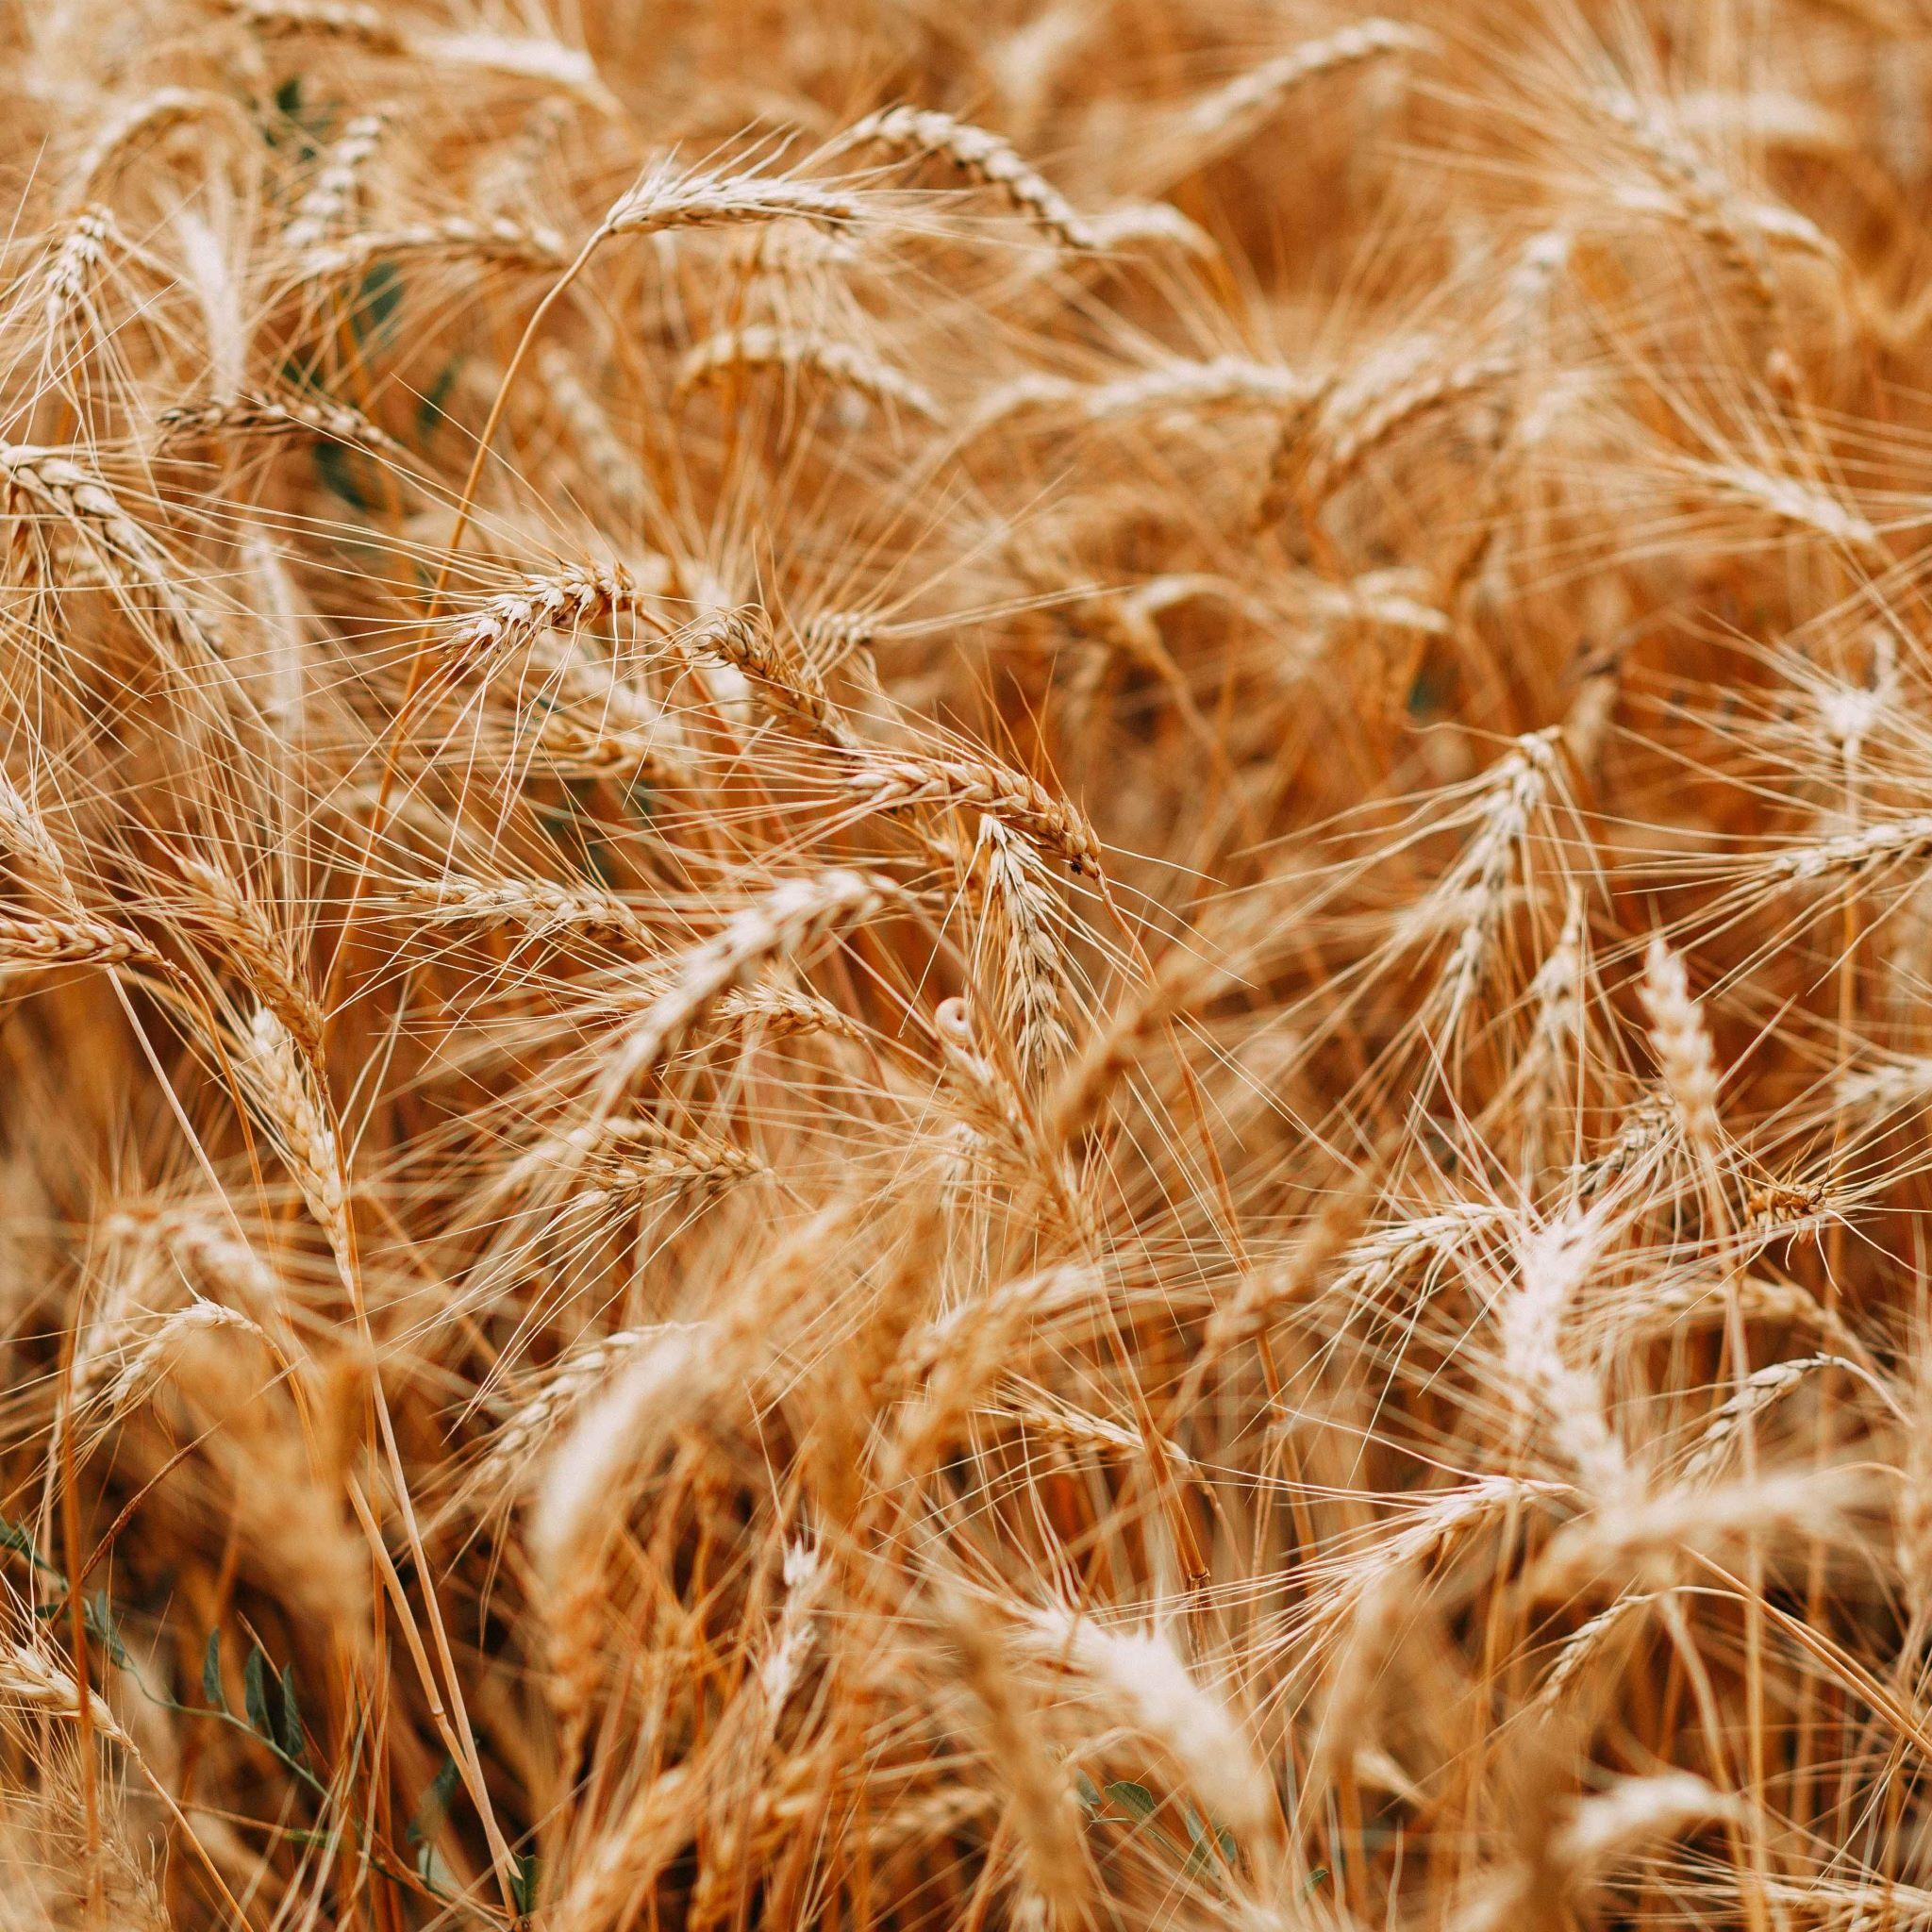 Crops. Photo by Natalie Bond from pexels